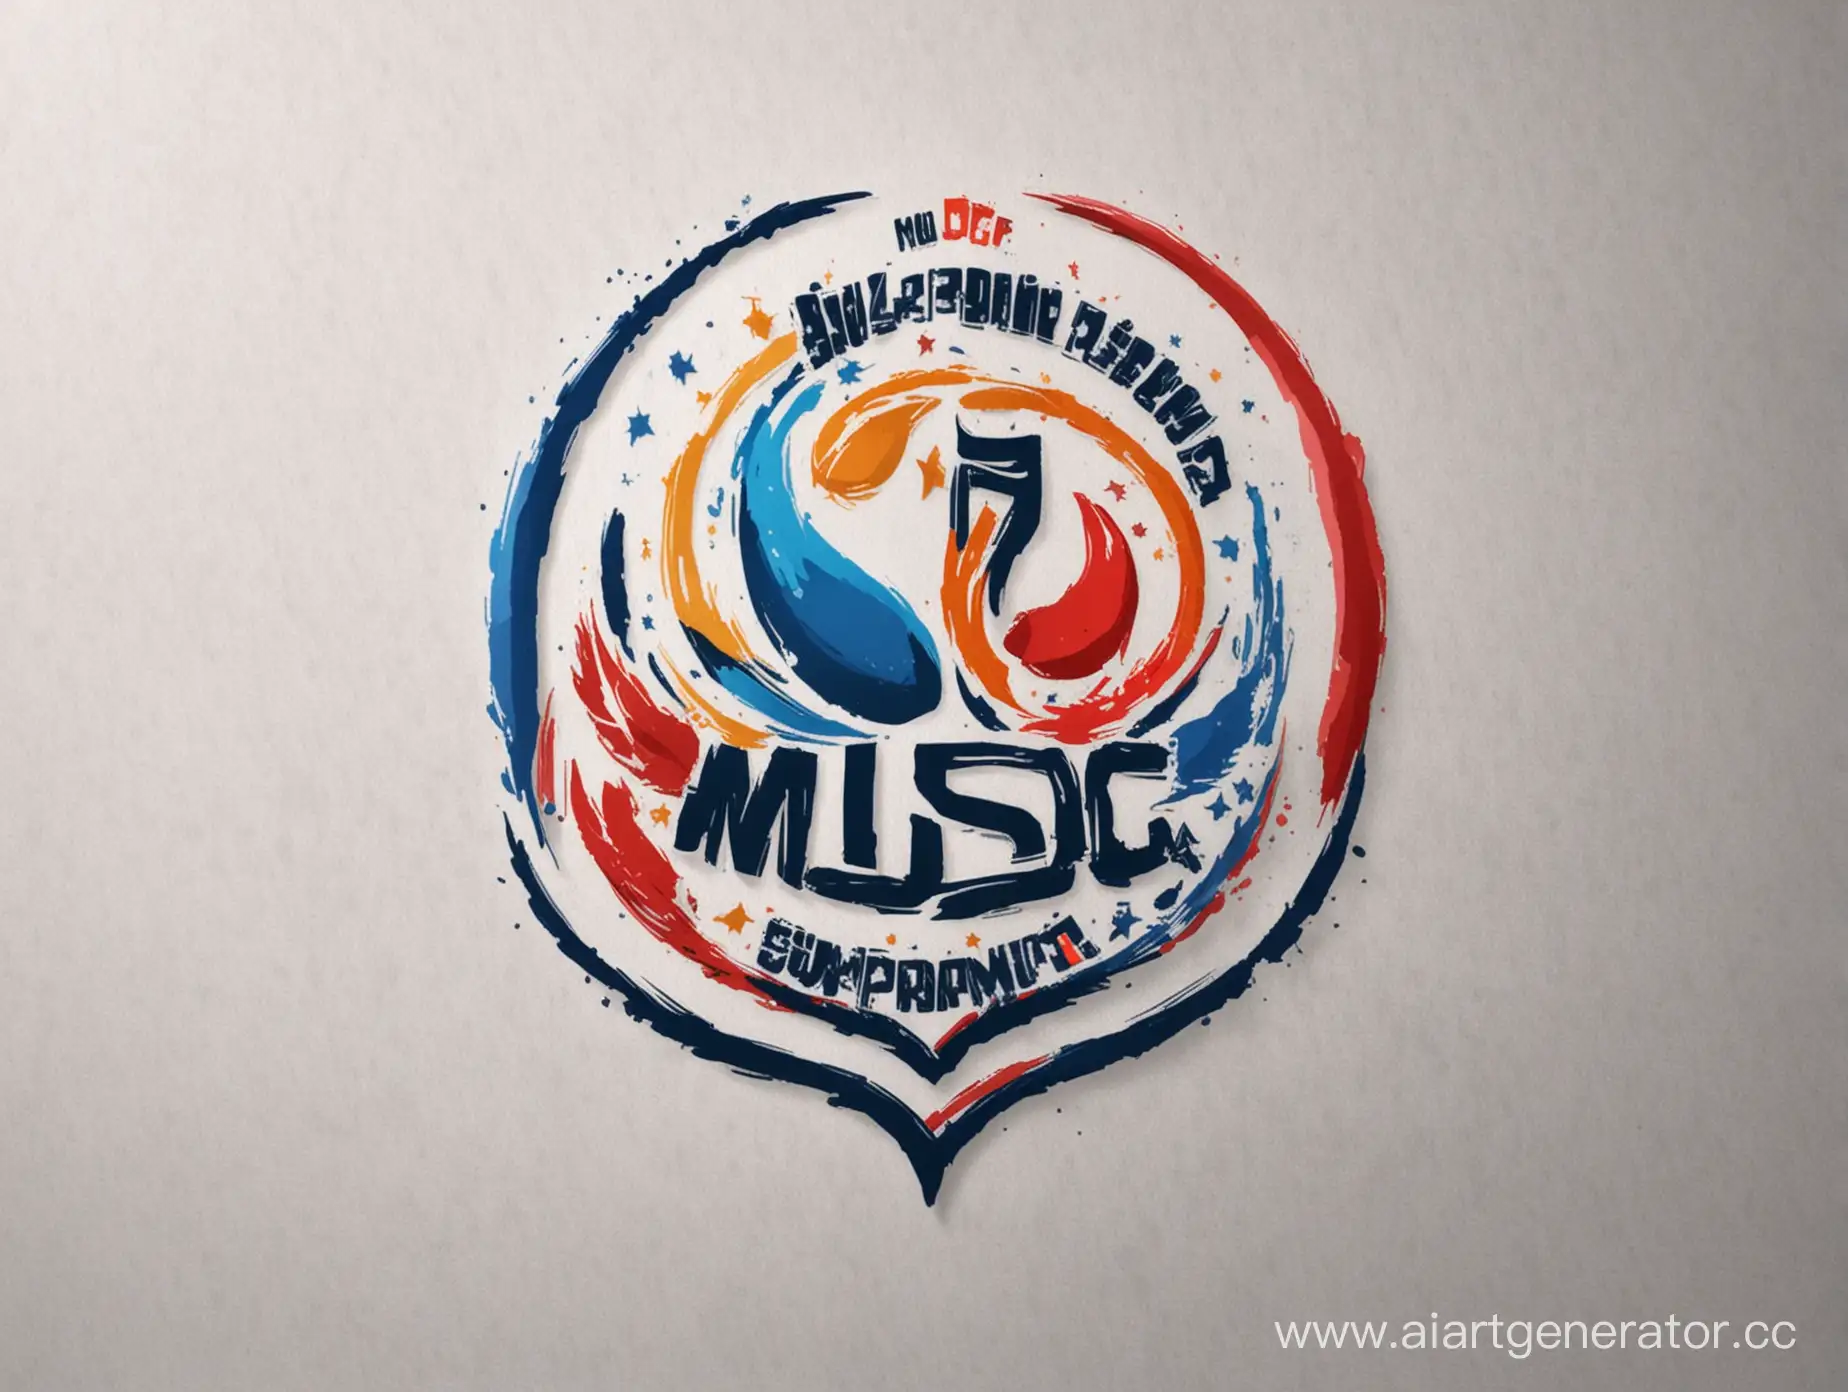 Empowering-Youth-Music-Support-Program-Logo-in-Donetsk-Peoples-Republic